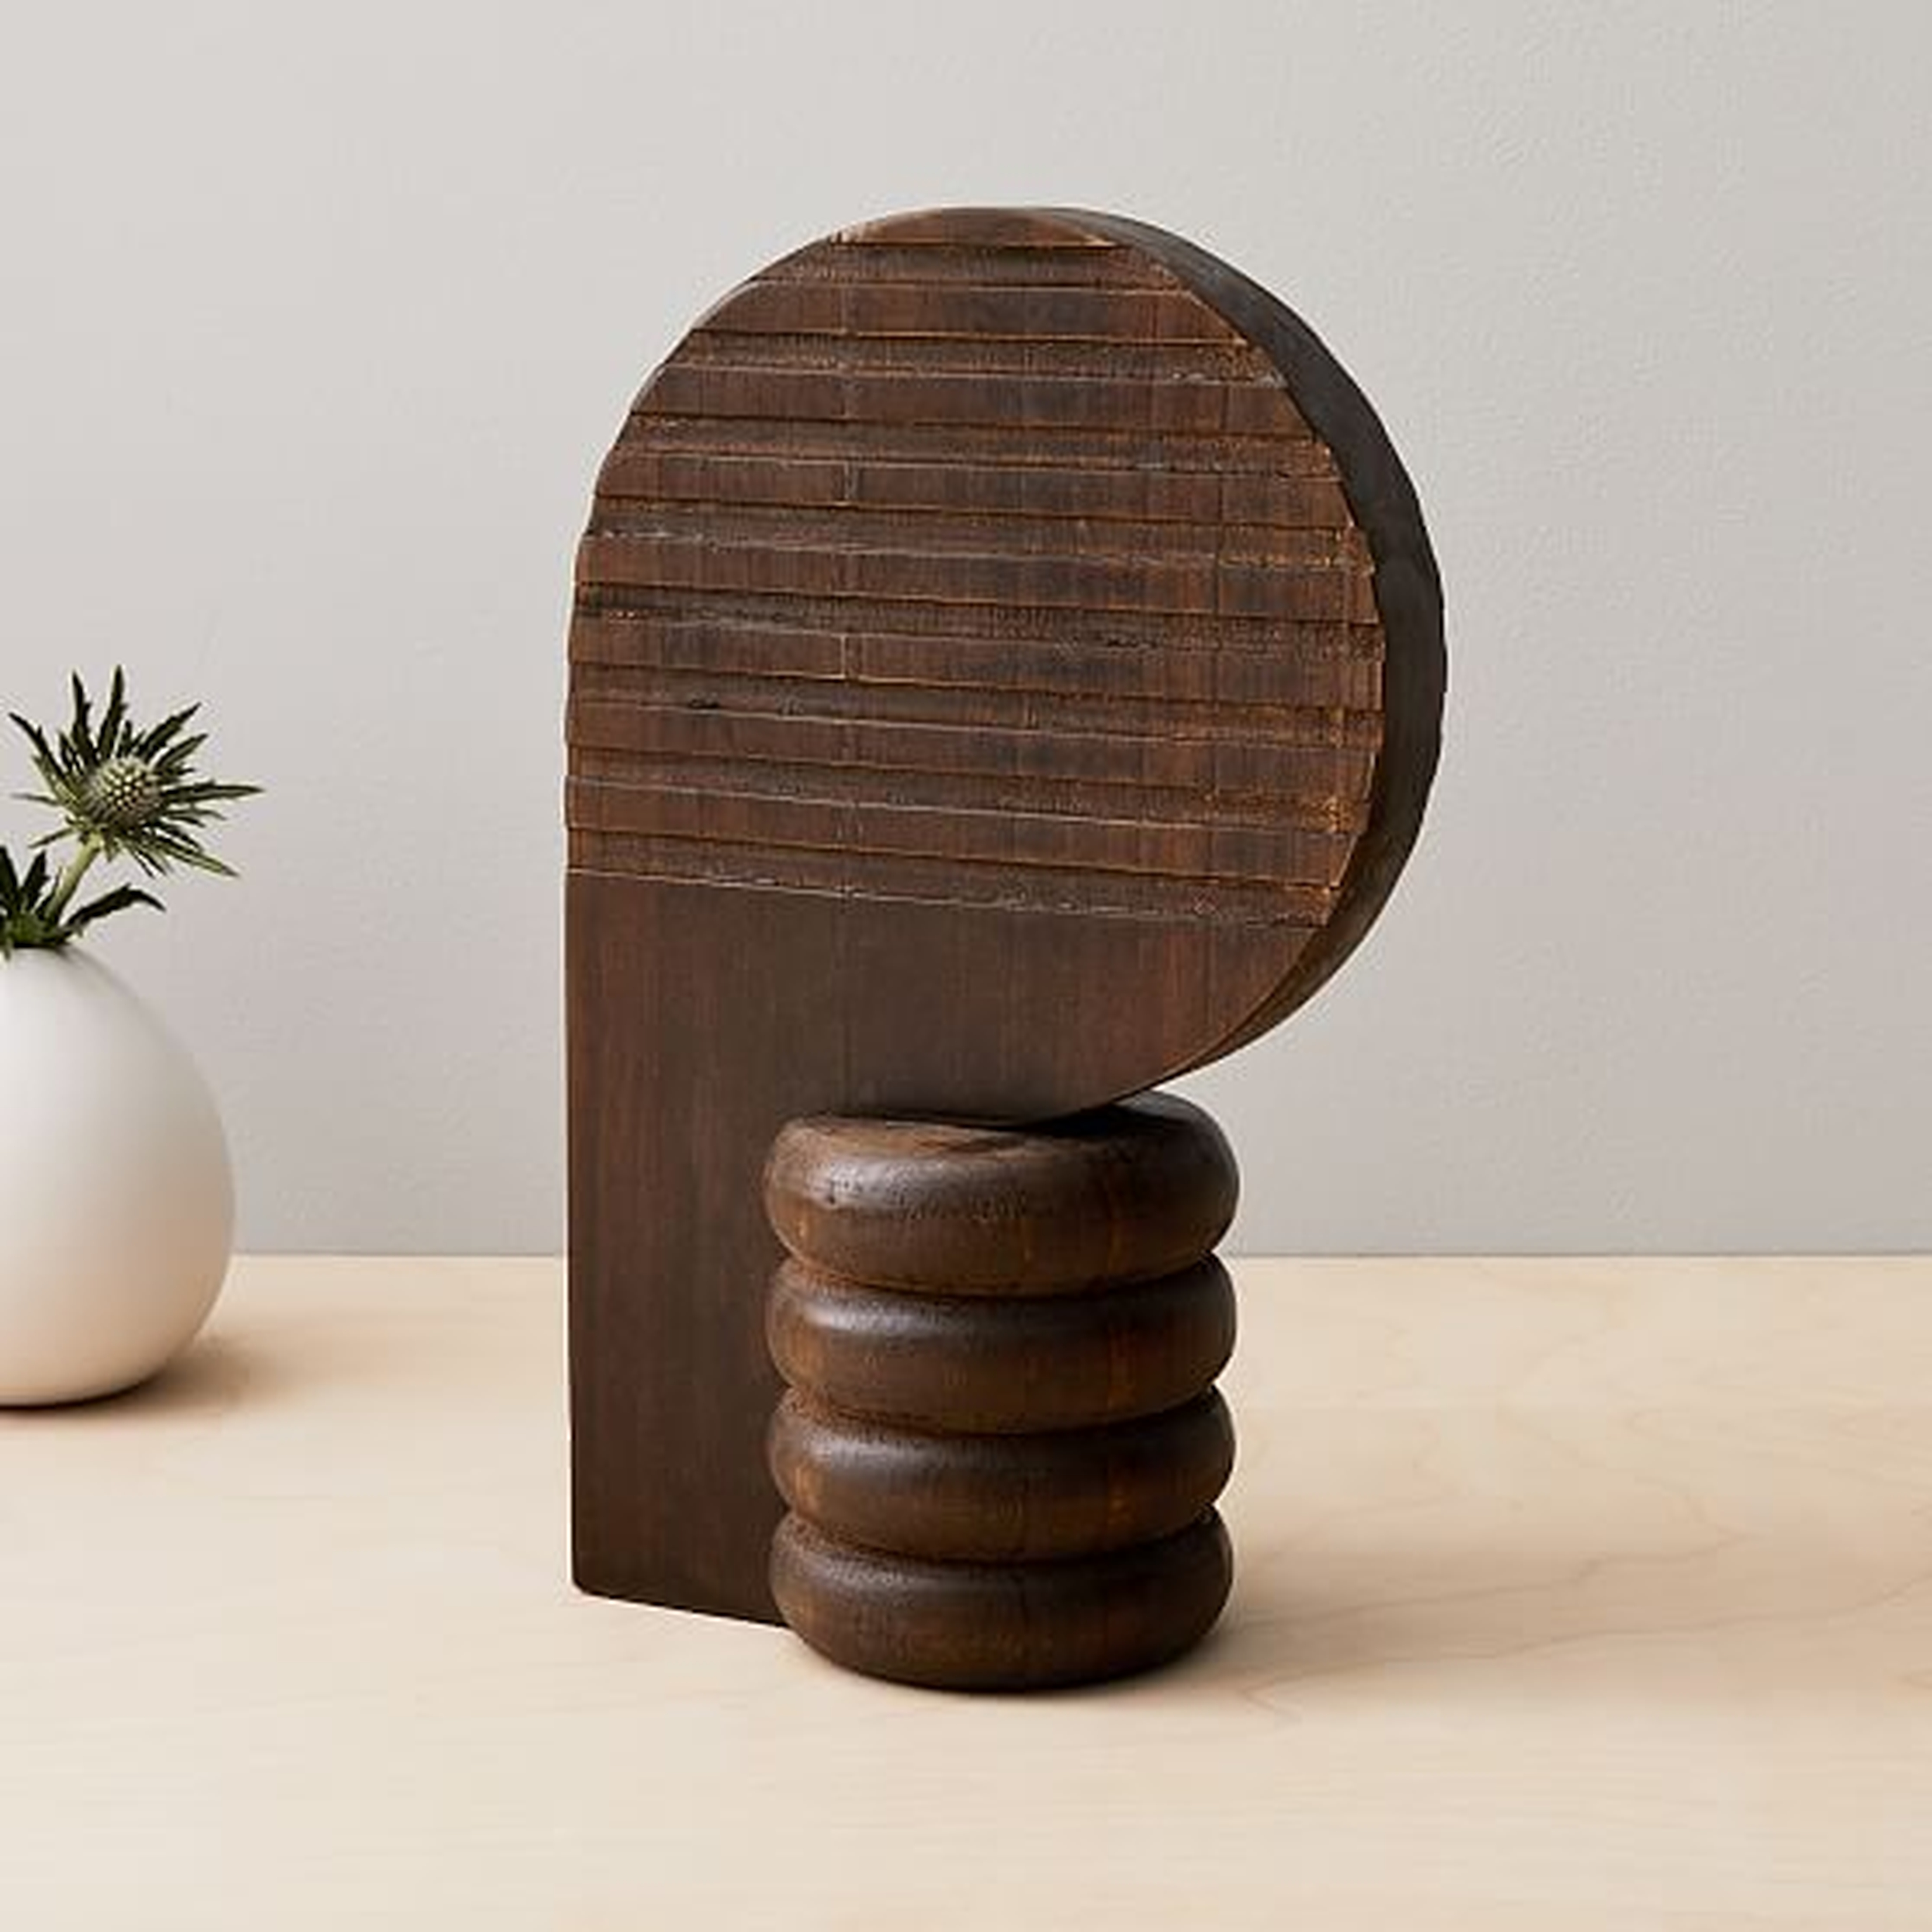 Diego Olivero Wood Decorative Object, Silhouette, Set of 2 - West Elm